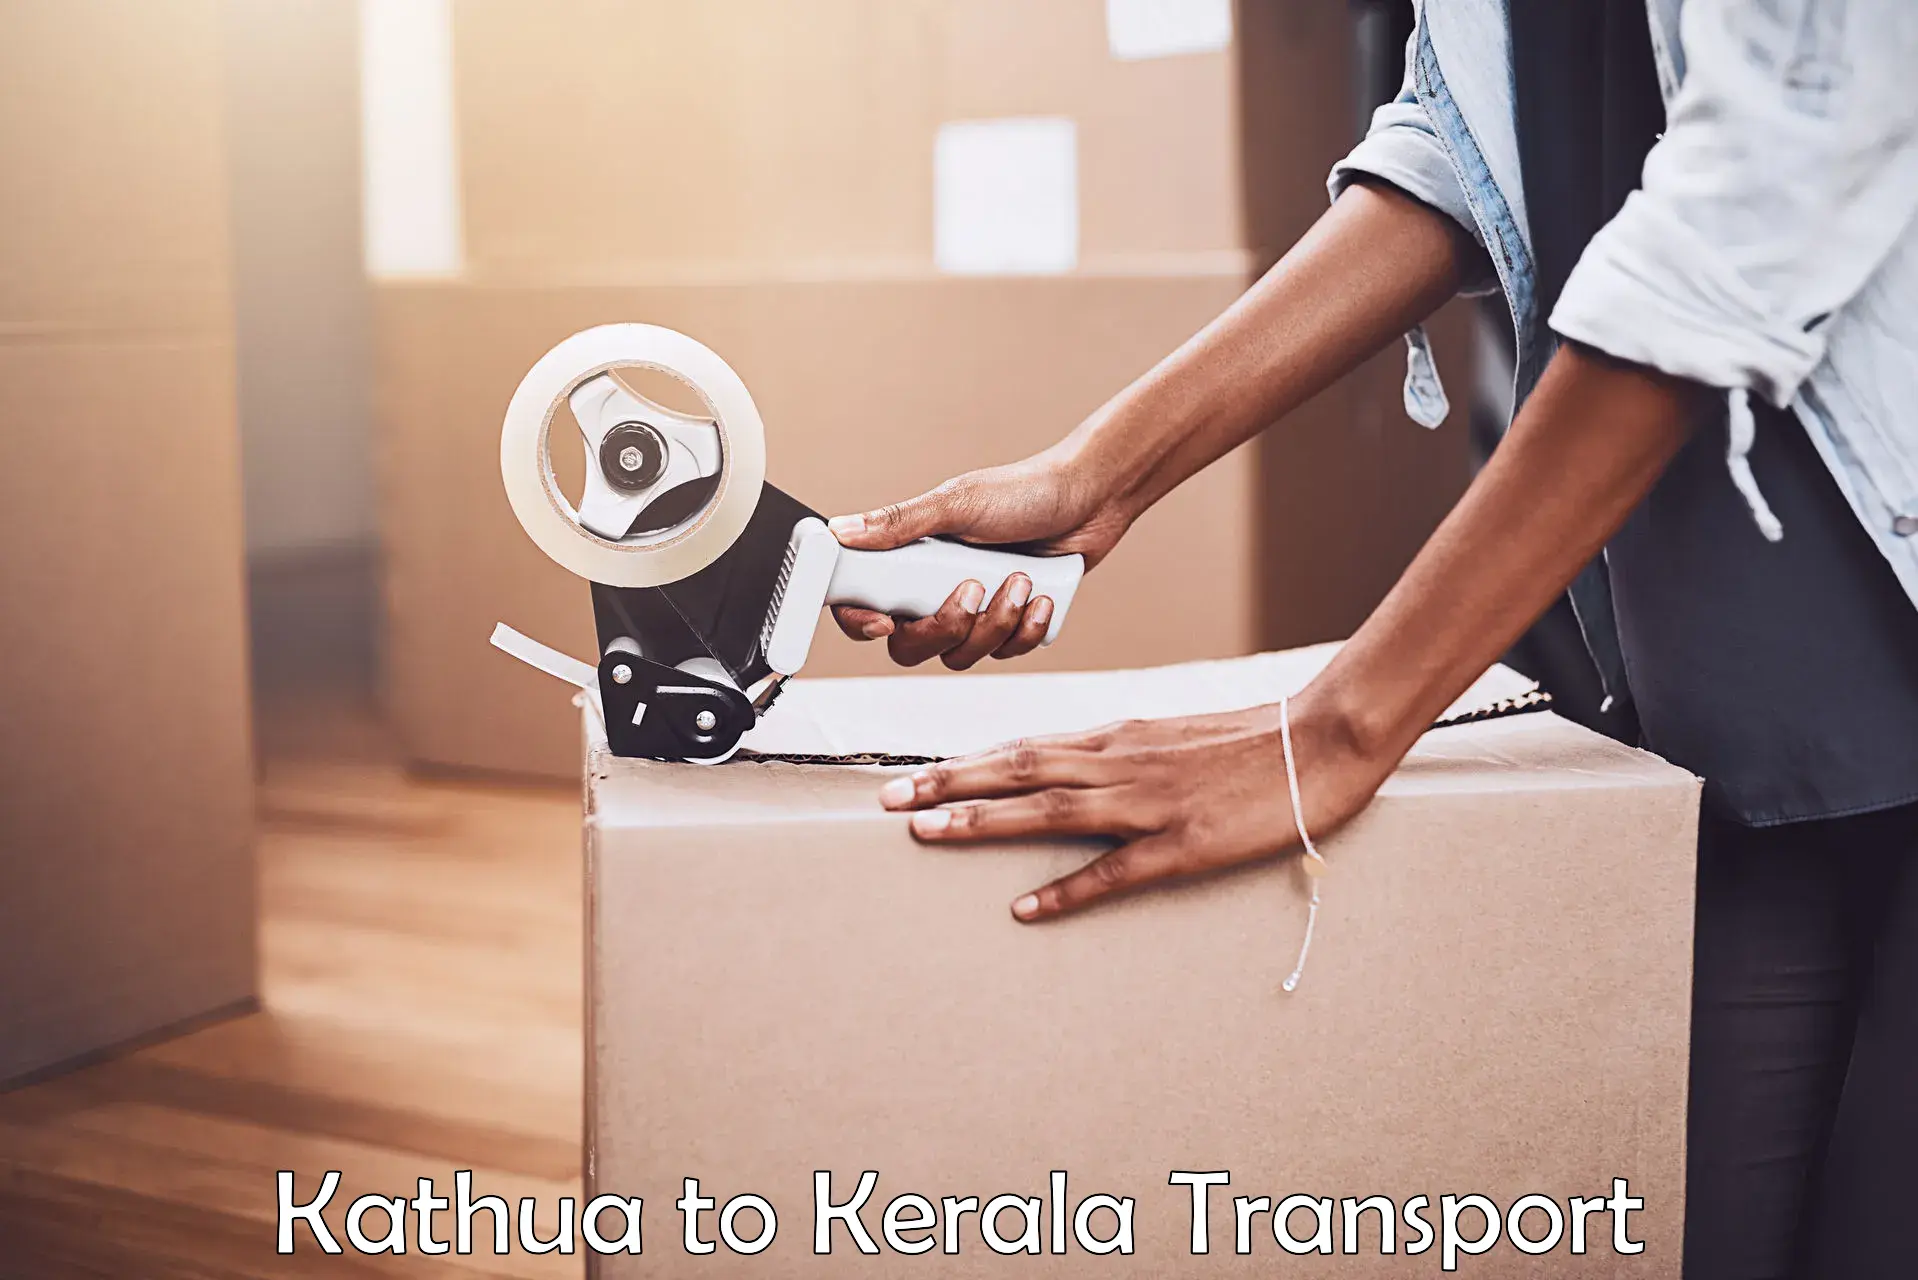 Delivery service Kathua to Panthalam